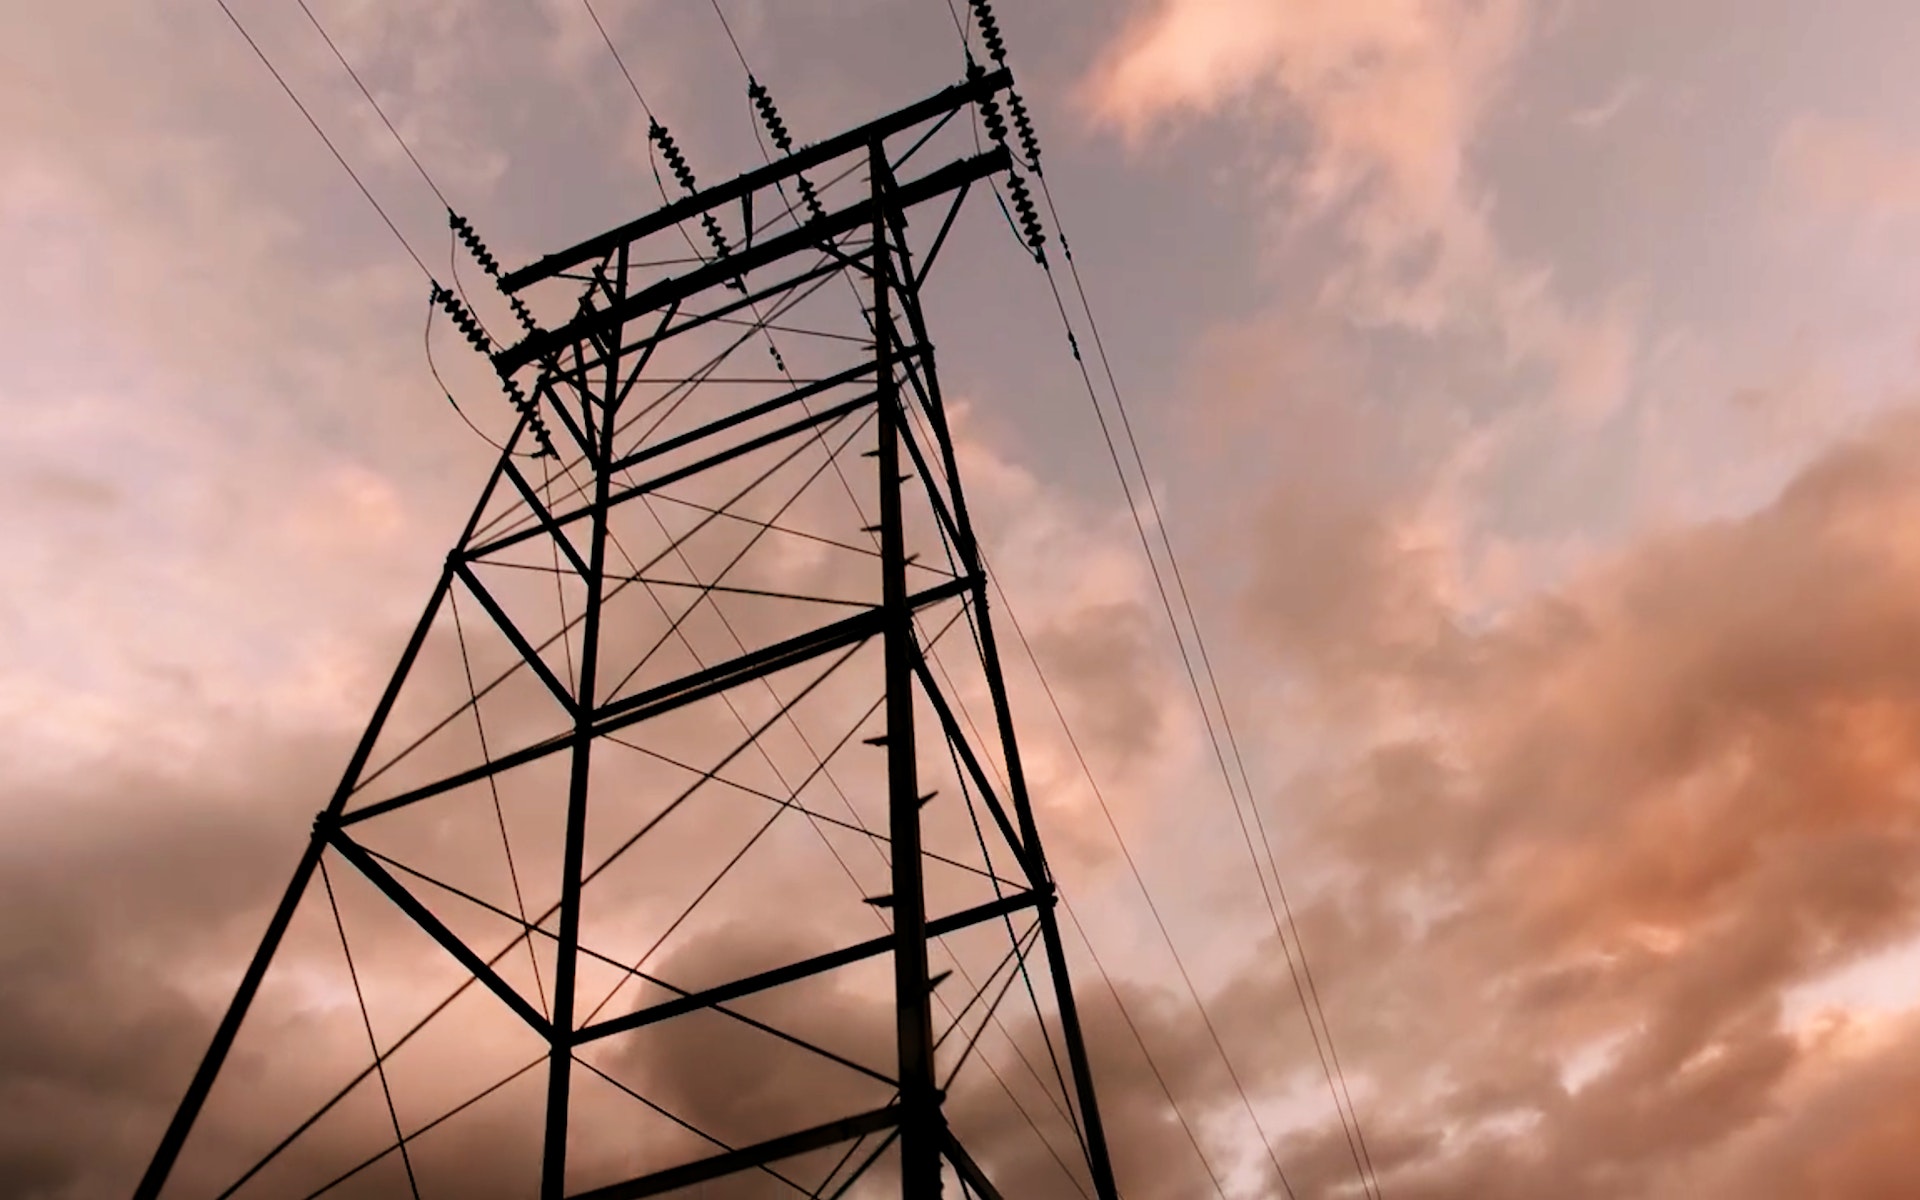 A high power line tower stands in front of a clowdy sky.